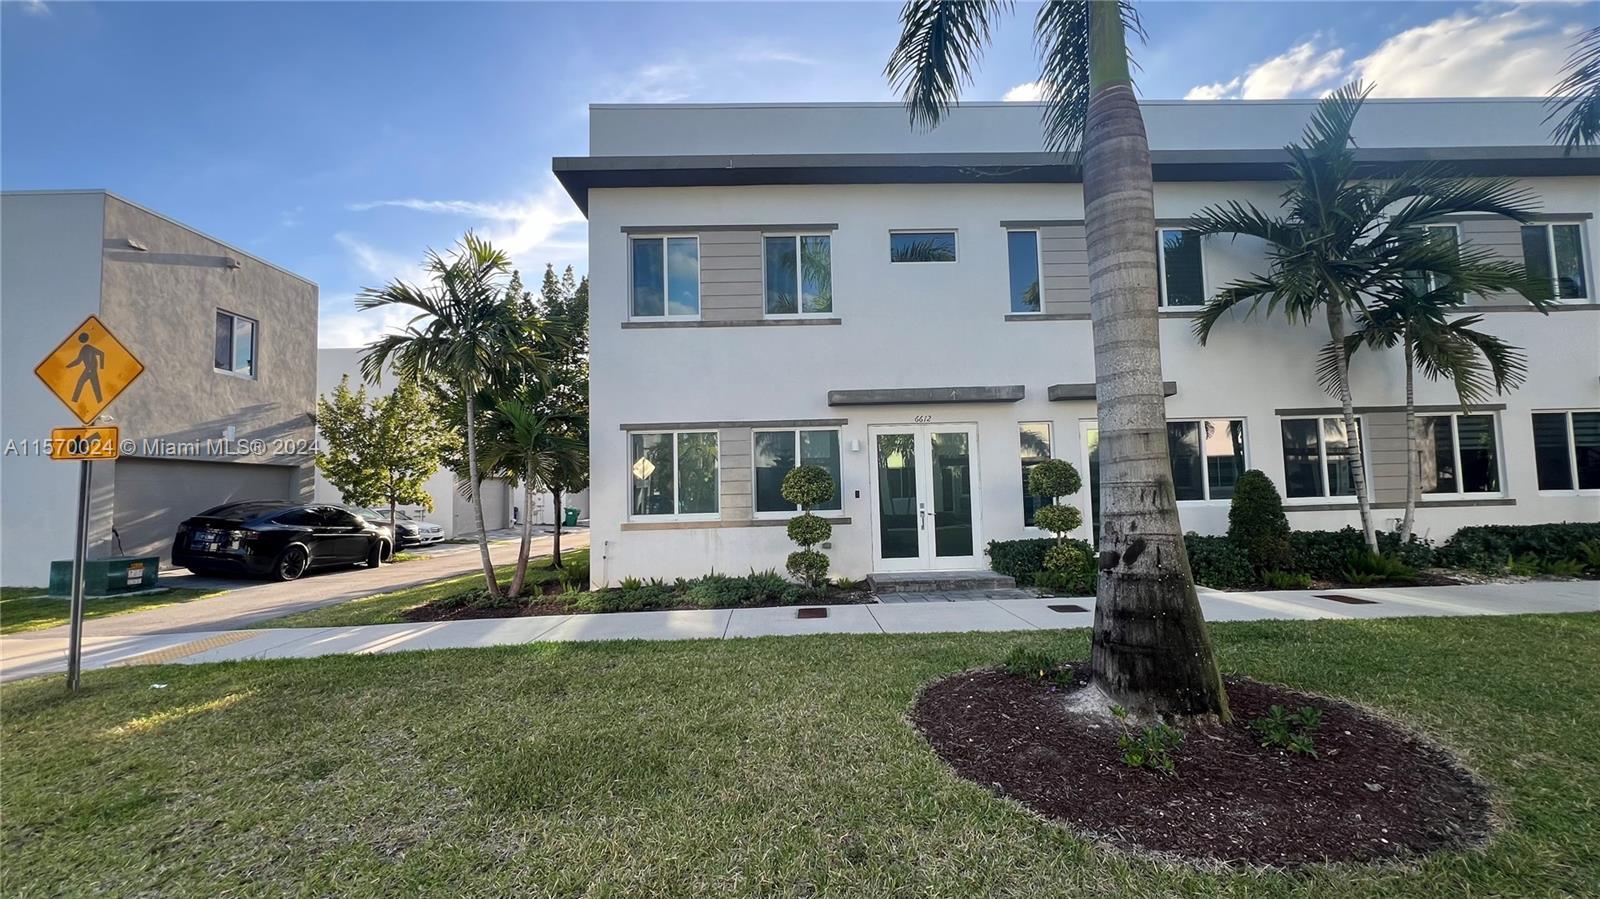 Photo of 6612 NW 103rd Pky in Doral, FL